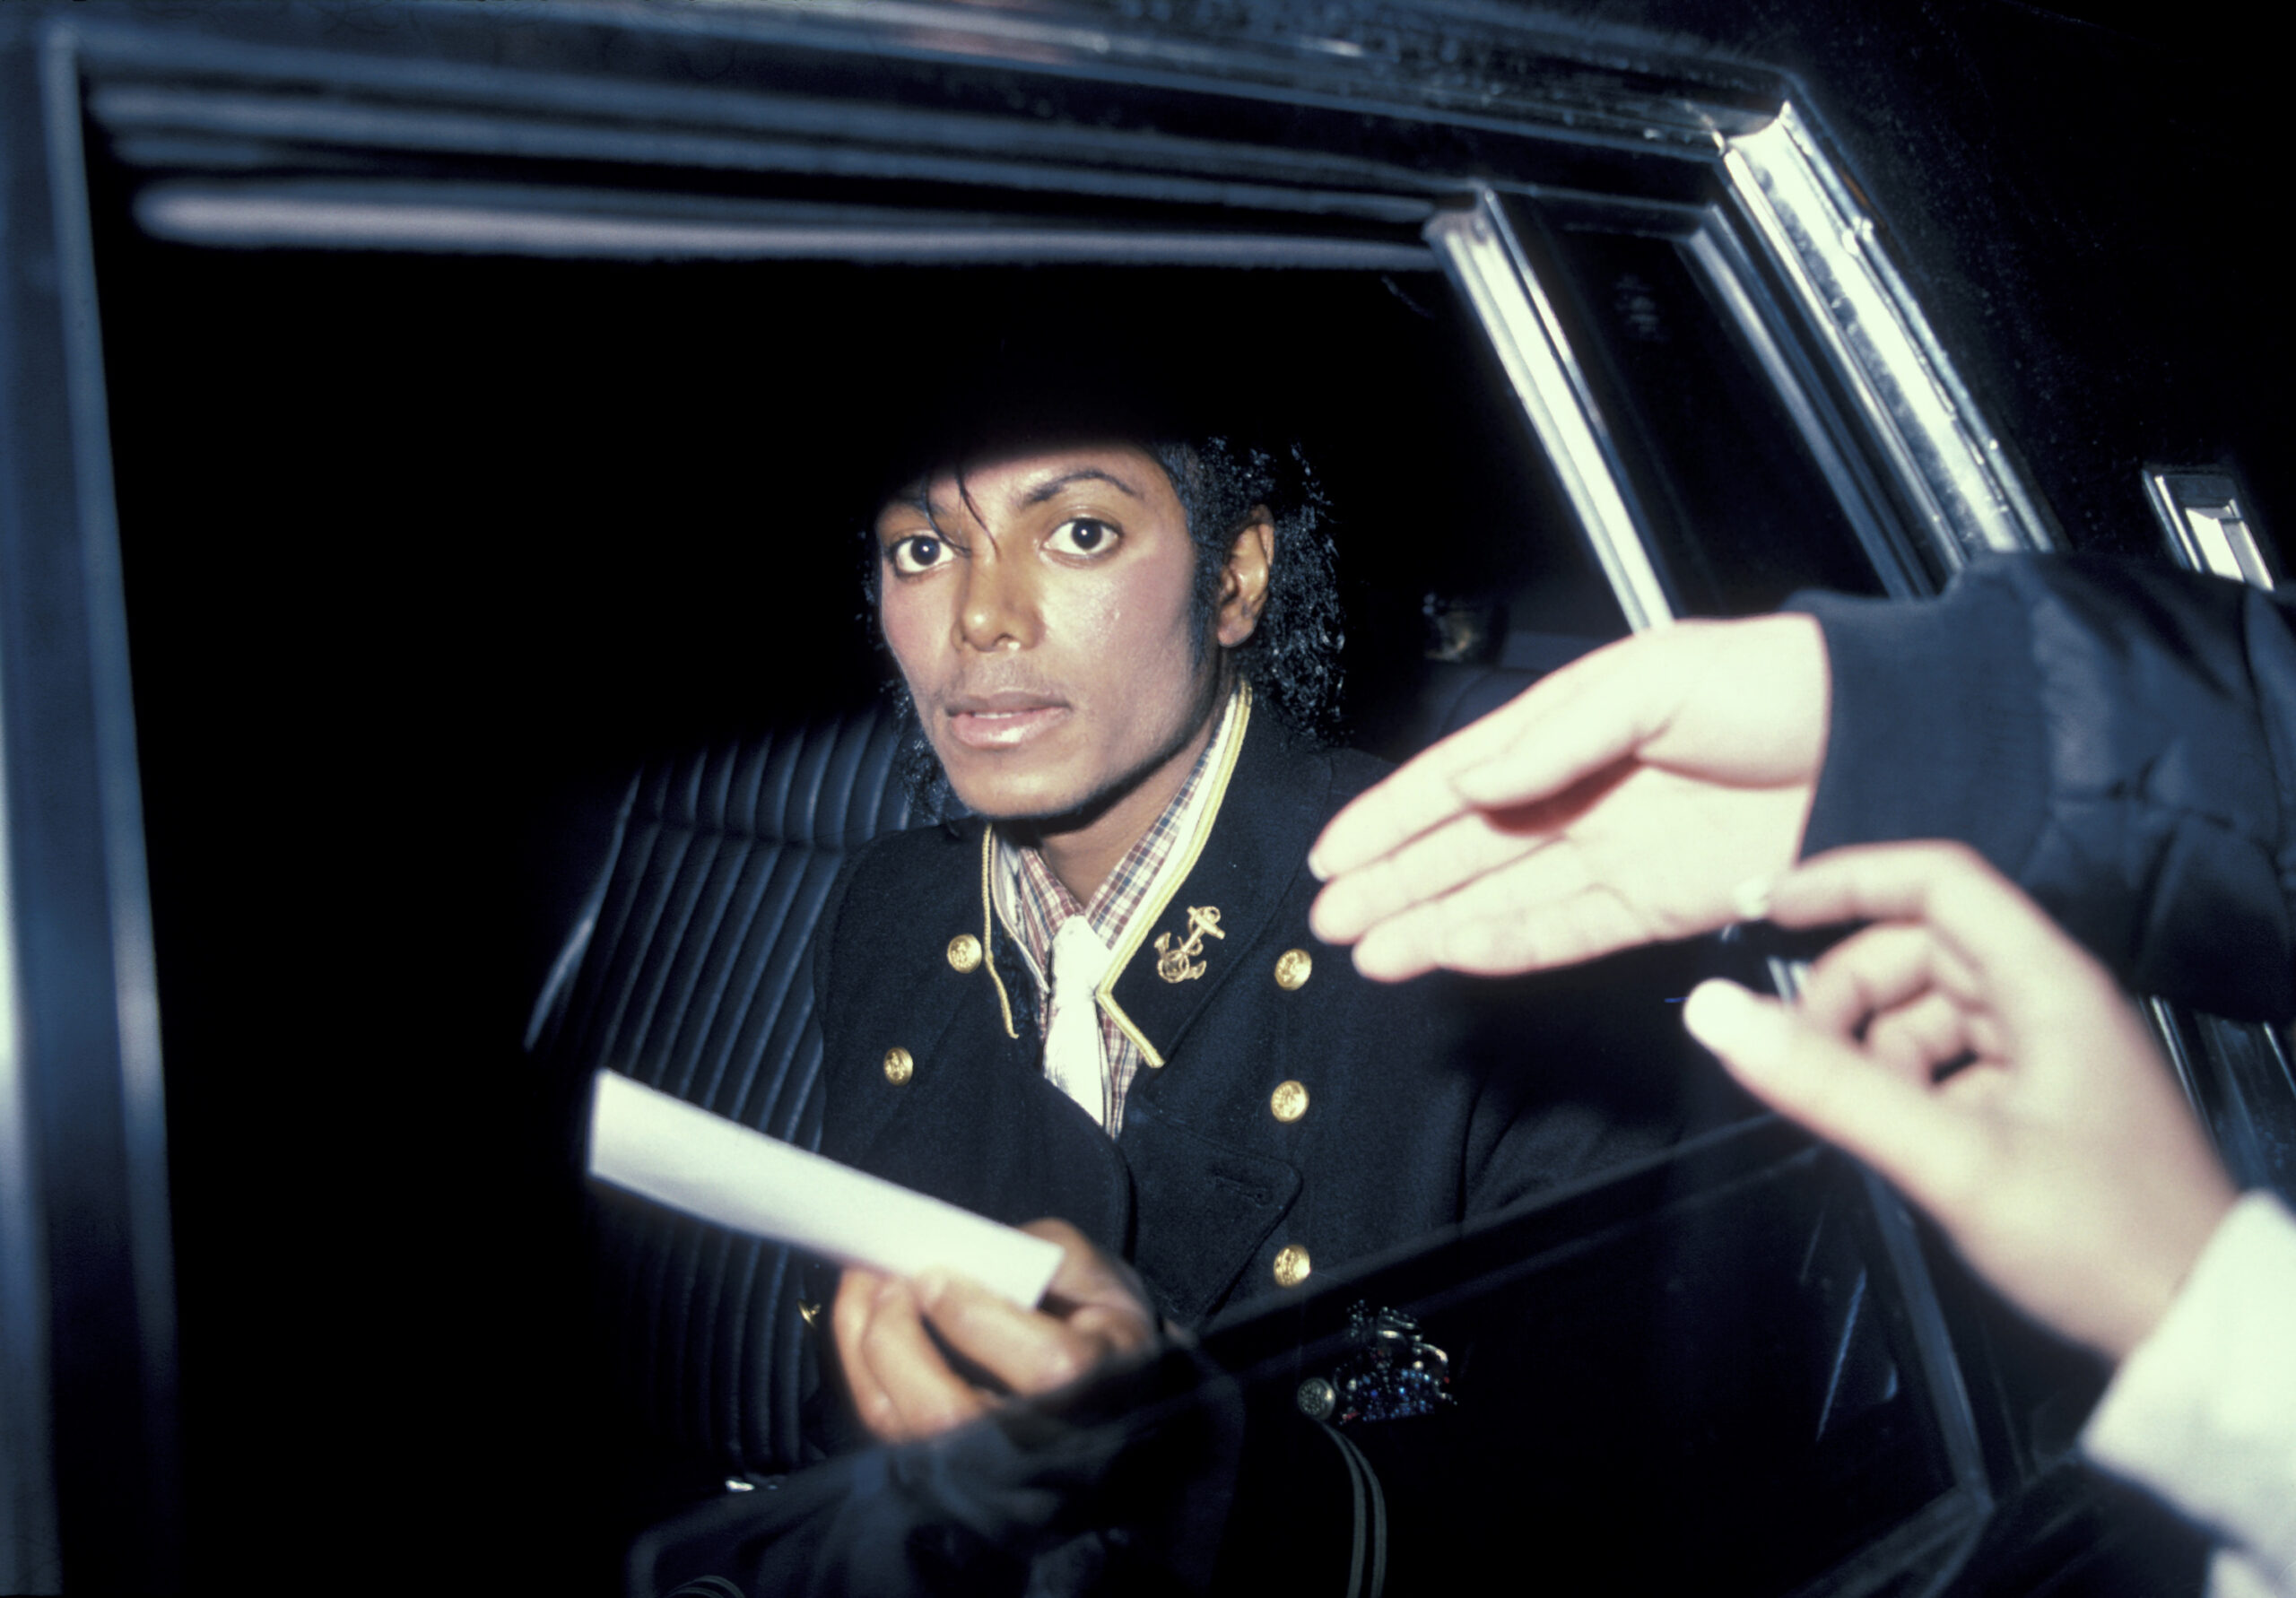 Michael Jackson’s Company Wants Accusers Blocked From Seeing Nudes